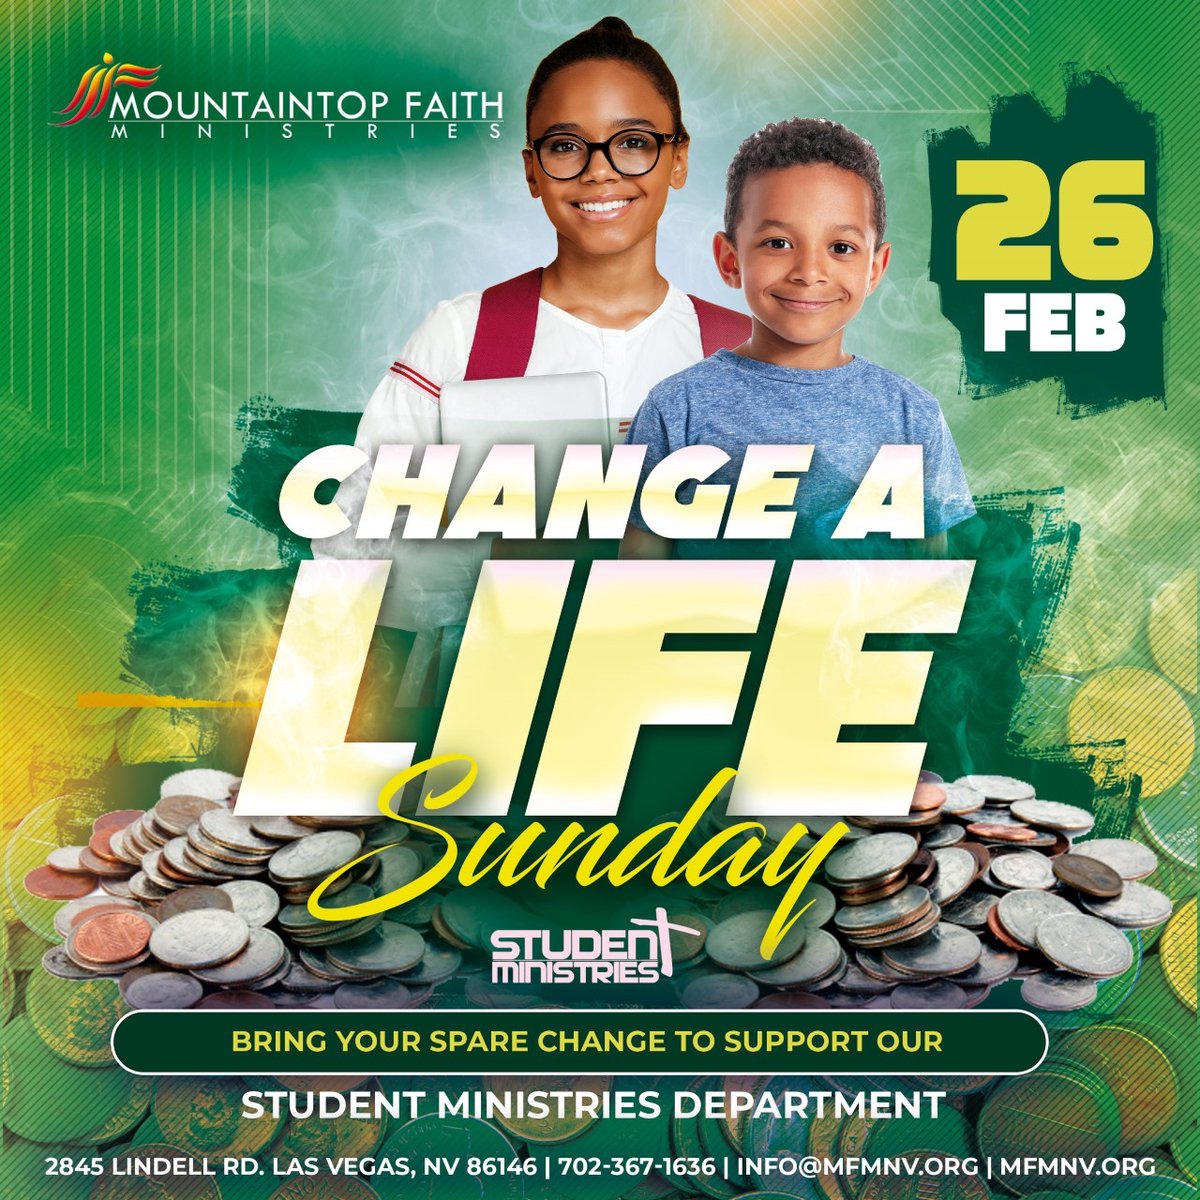 Have spare change? Join us tomorrow at 9 am for our Change a life Sunday service to support our Student Ministries department!  #ChangeALife #donations #studentministries #sundayserivce #MFM